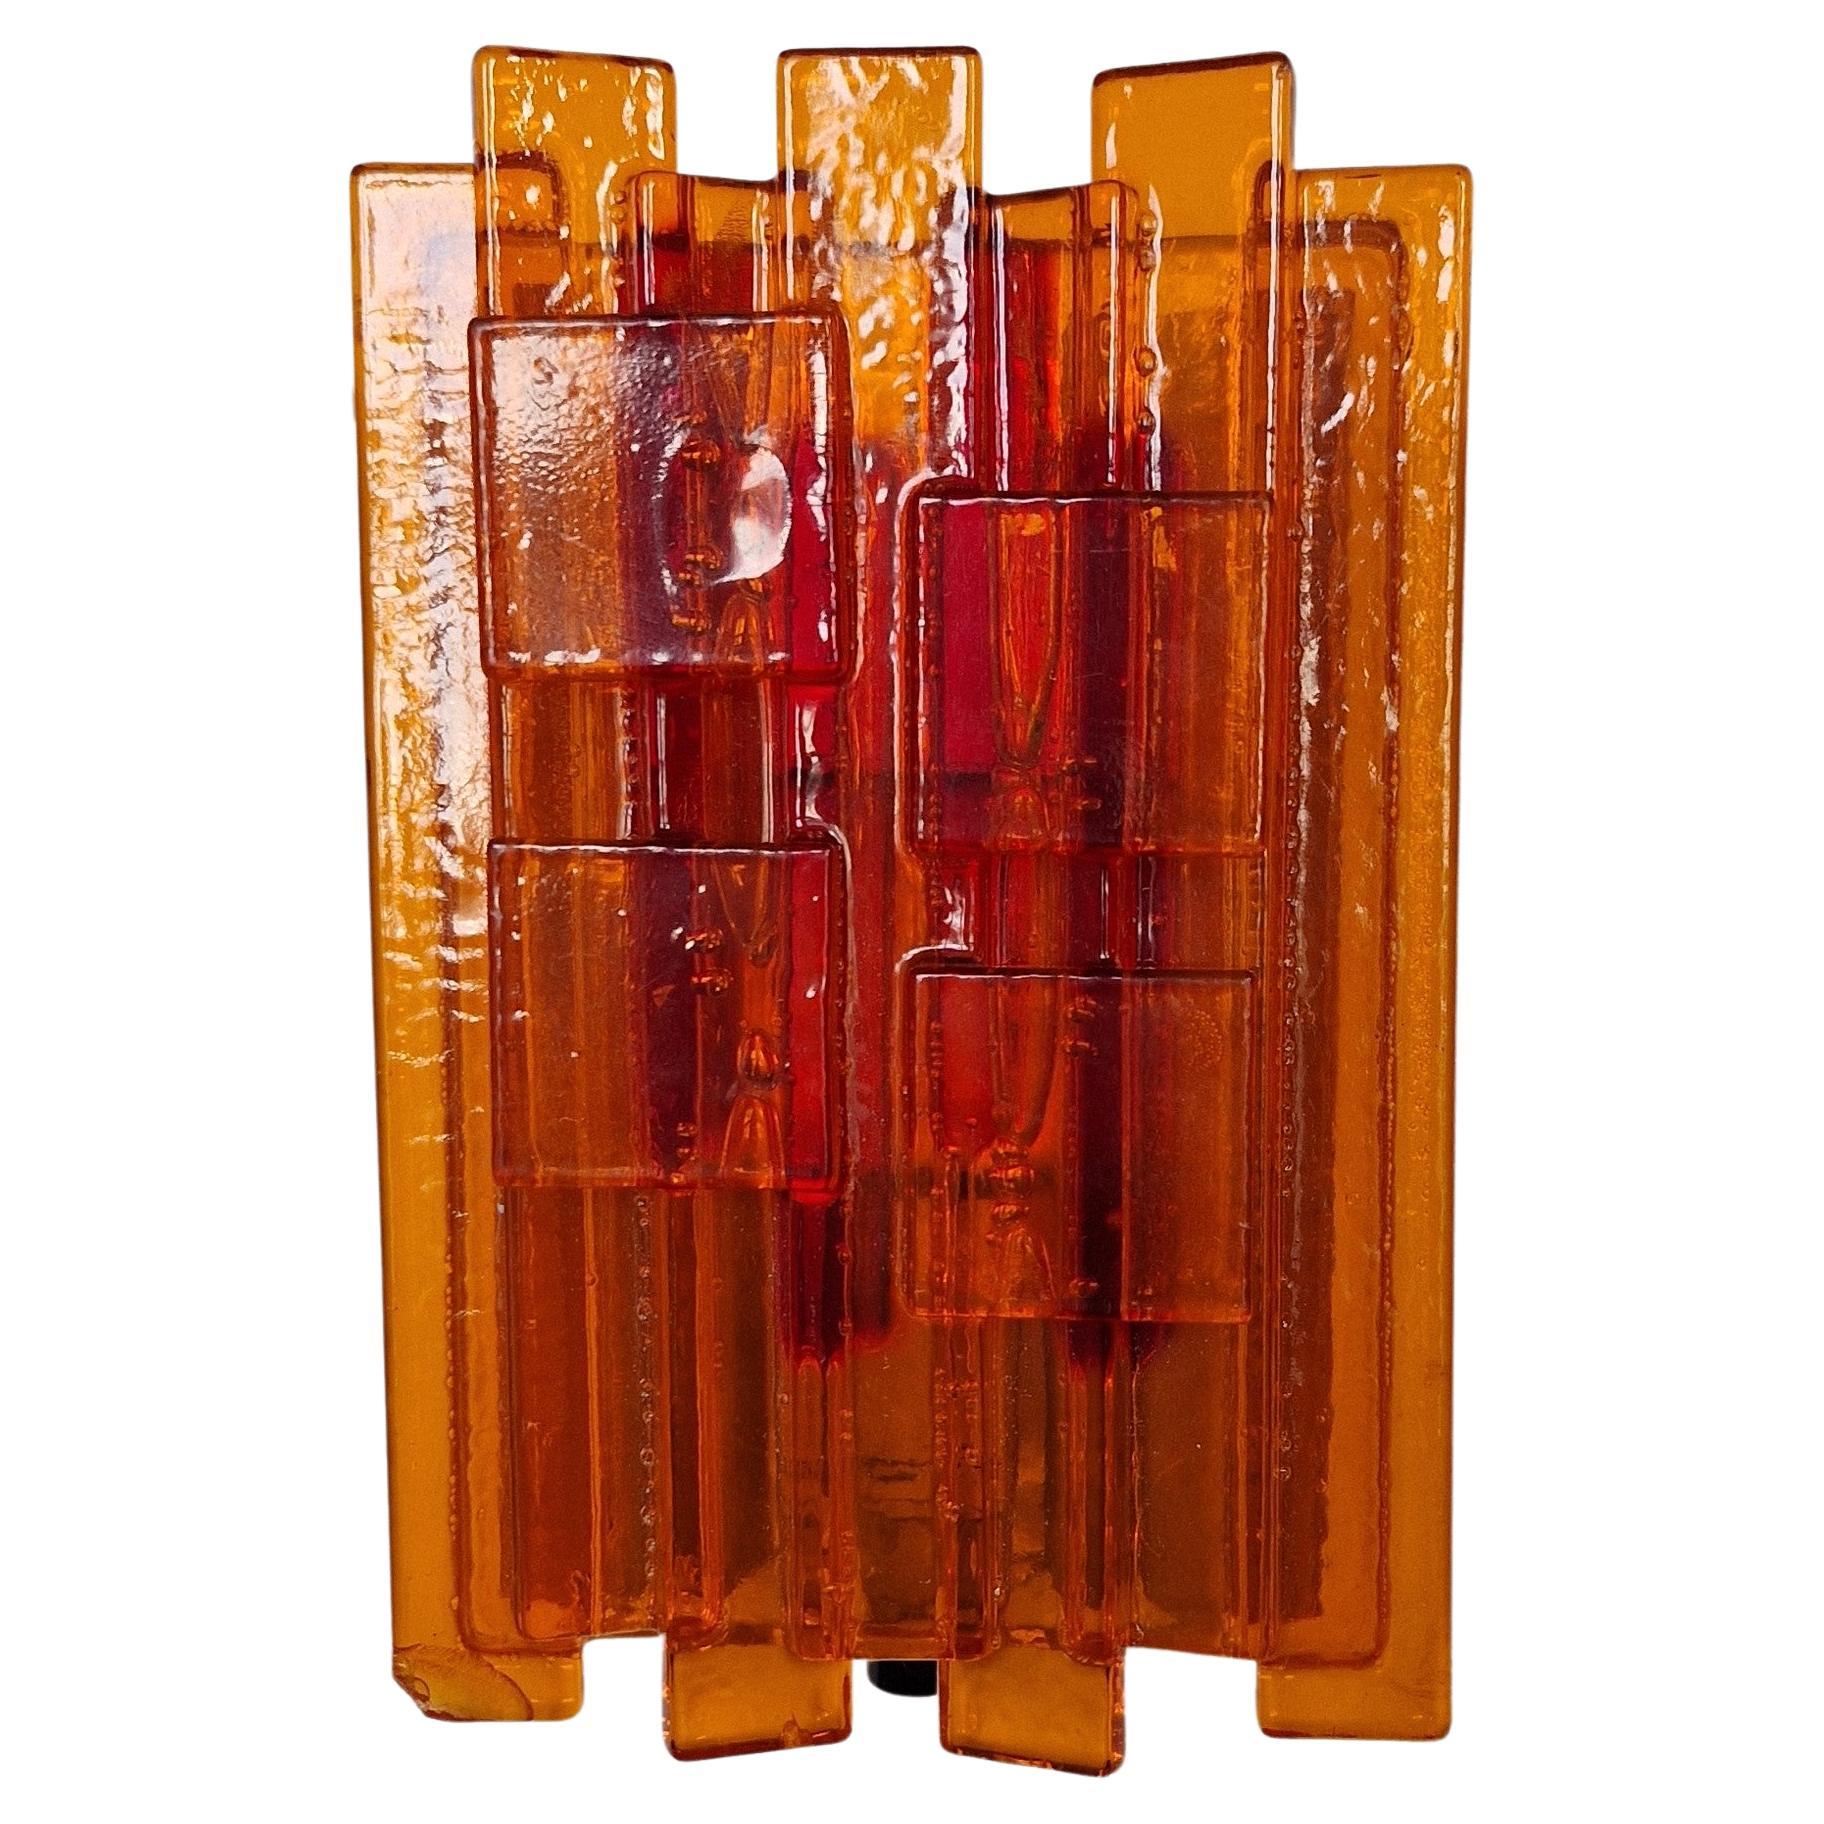 Orange Acrylic and Metal Wall Lamp by Claus Bolby for Cebo Industri, Denmark For Sale